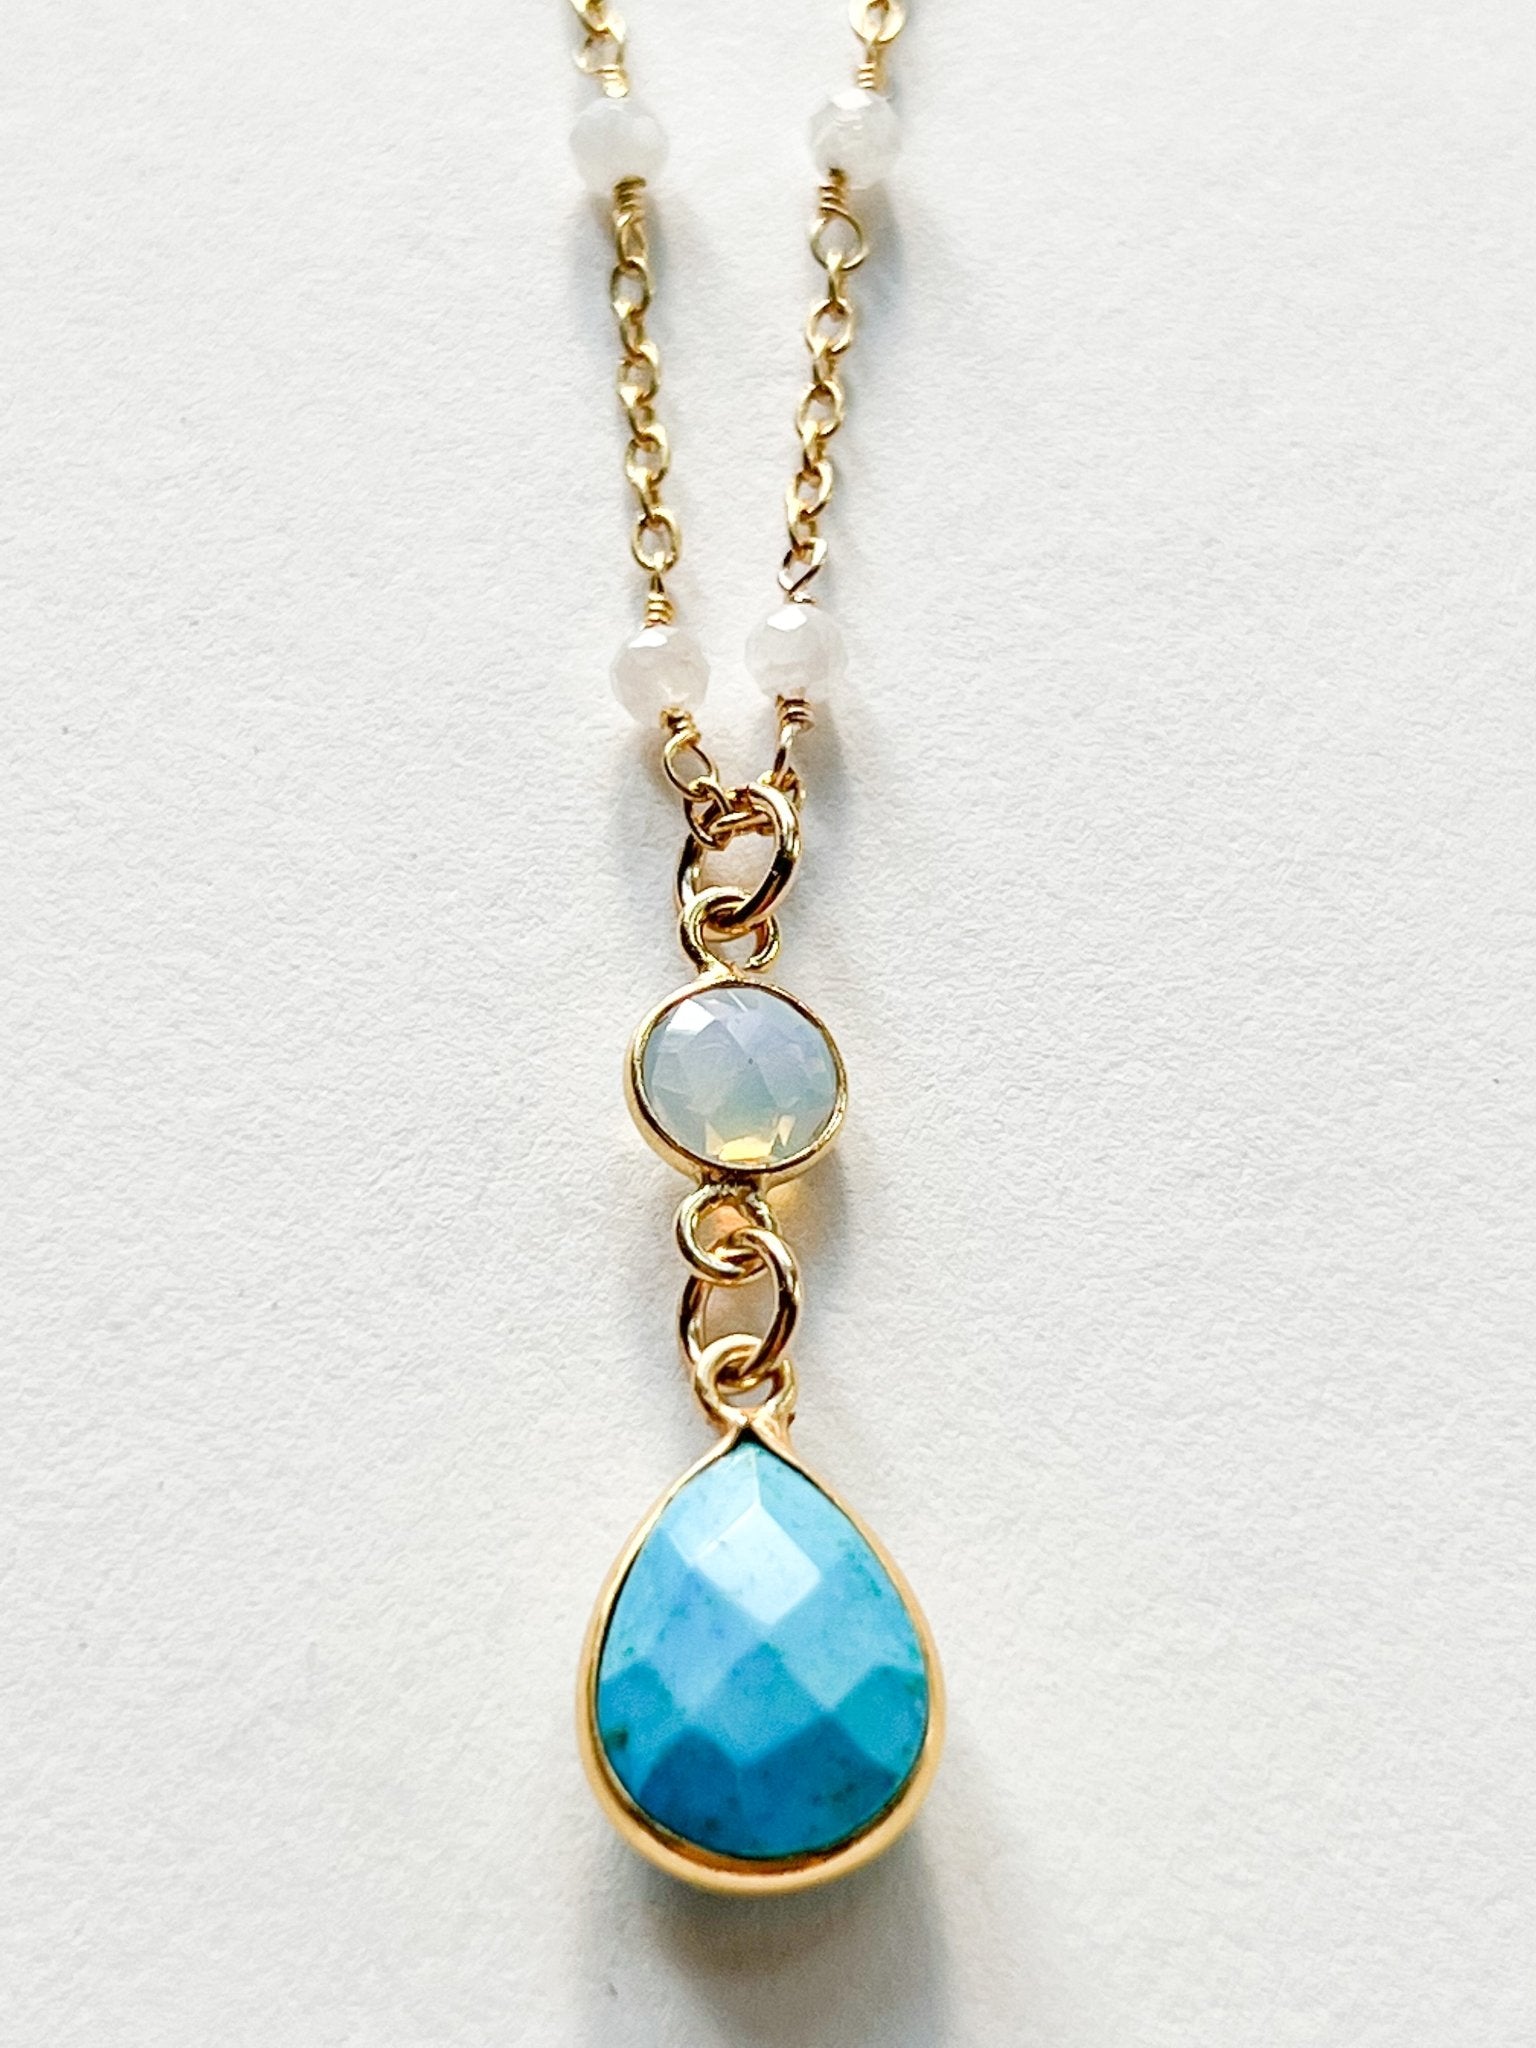 Arizona Turquoise and Opalite Double Drop Pear Shaped Pendant Necklace on Gold Chain with Blue Lace Agate by Sage Machado - The Sage Lifestyle